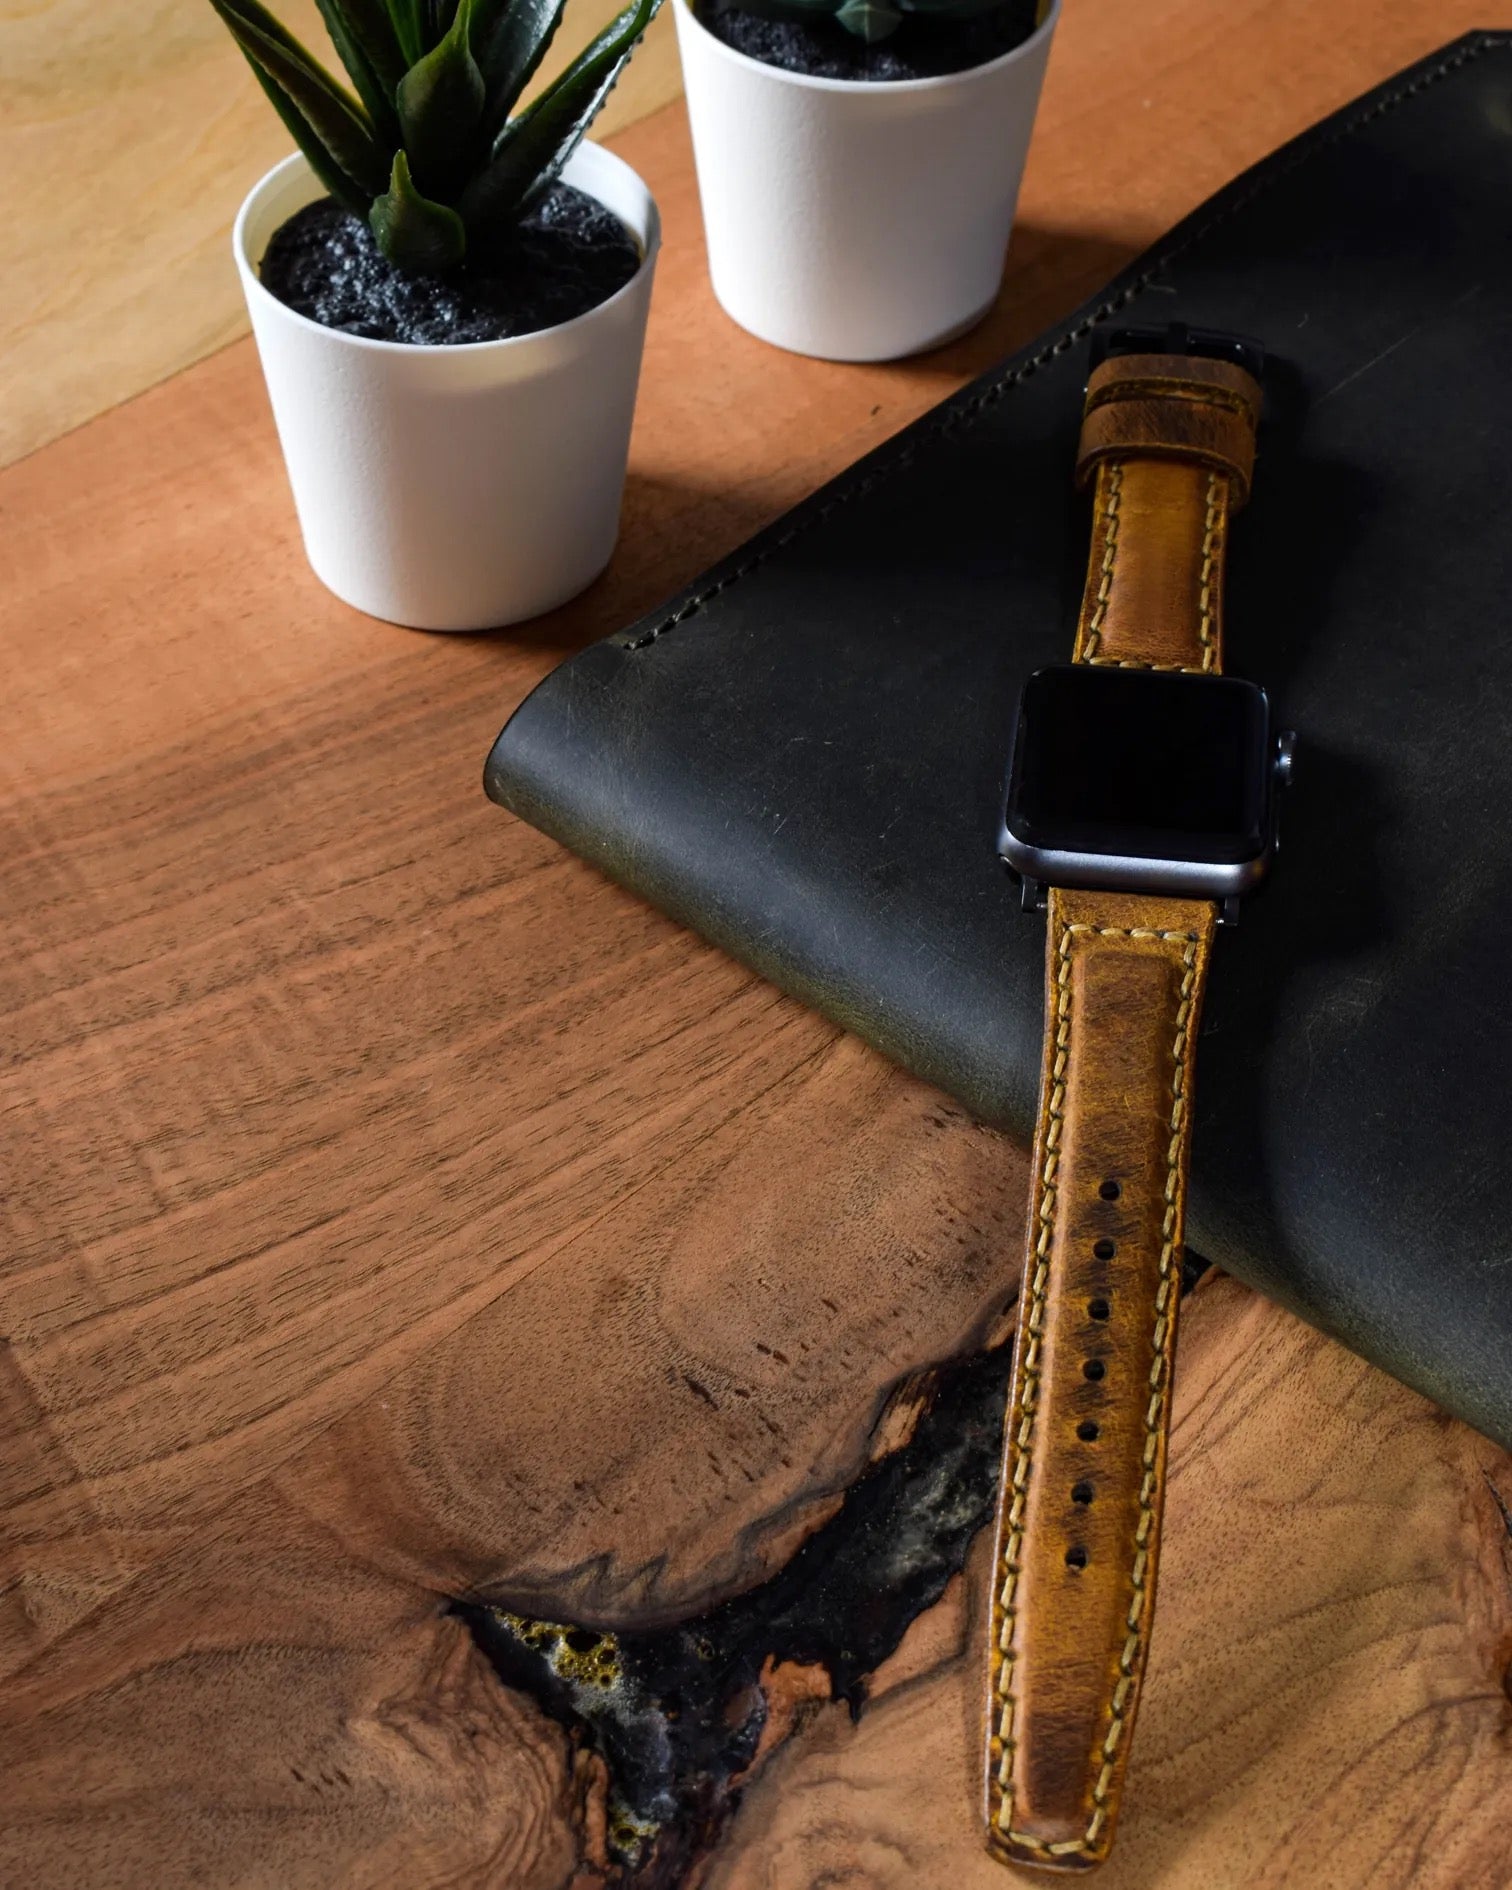 Apple Watch 8 45 MM Handmade Leather Band Strap Camel